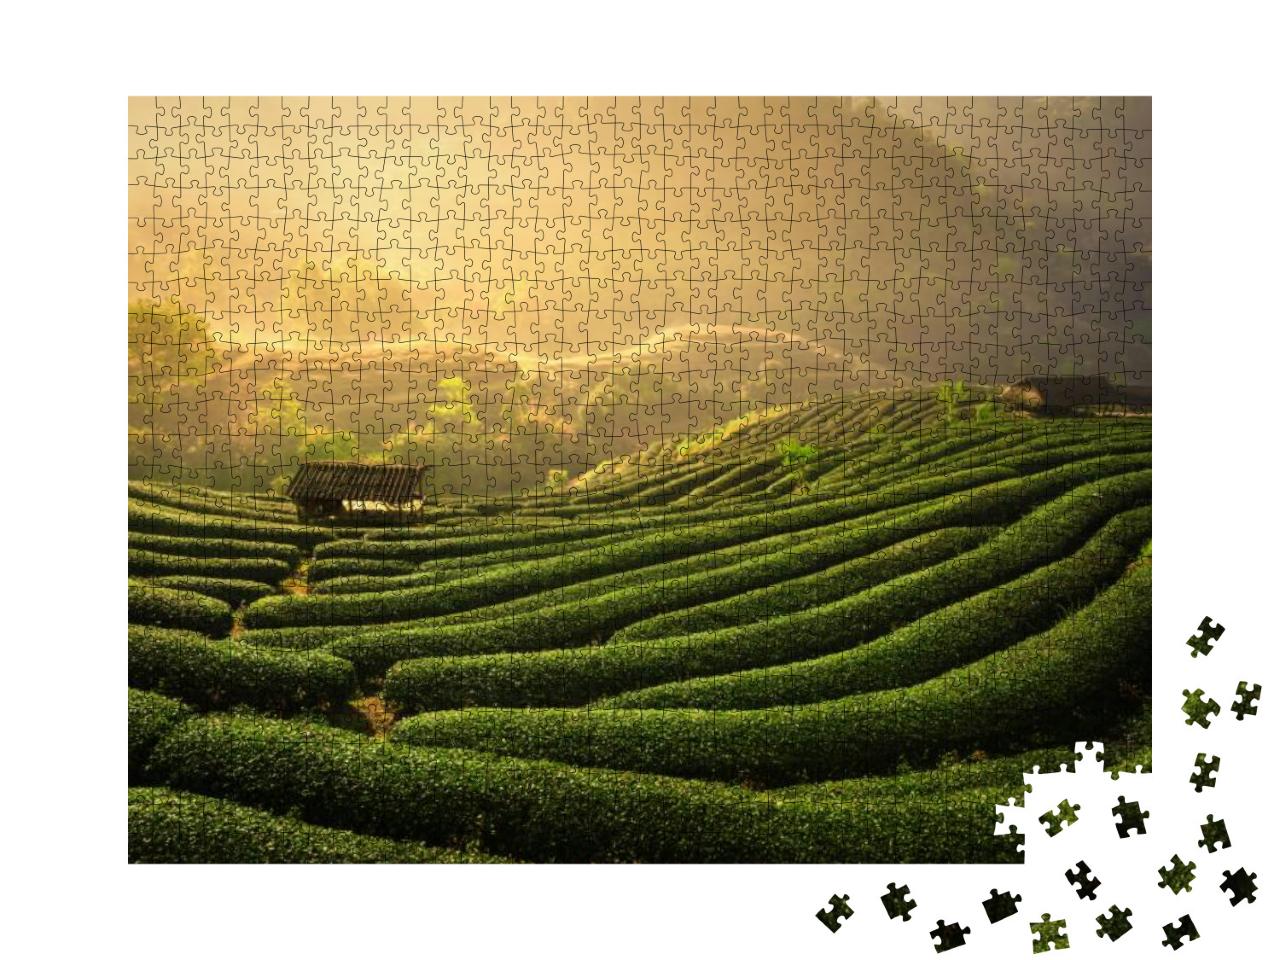 The Tea Plantations Background, Tea Plantations in Mornin... Jigsaw Puzzle with 1000 pieces